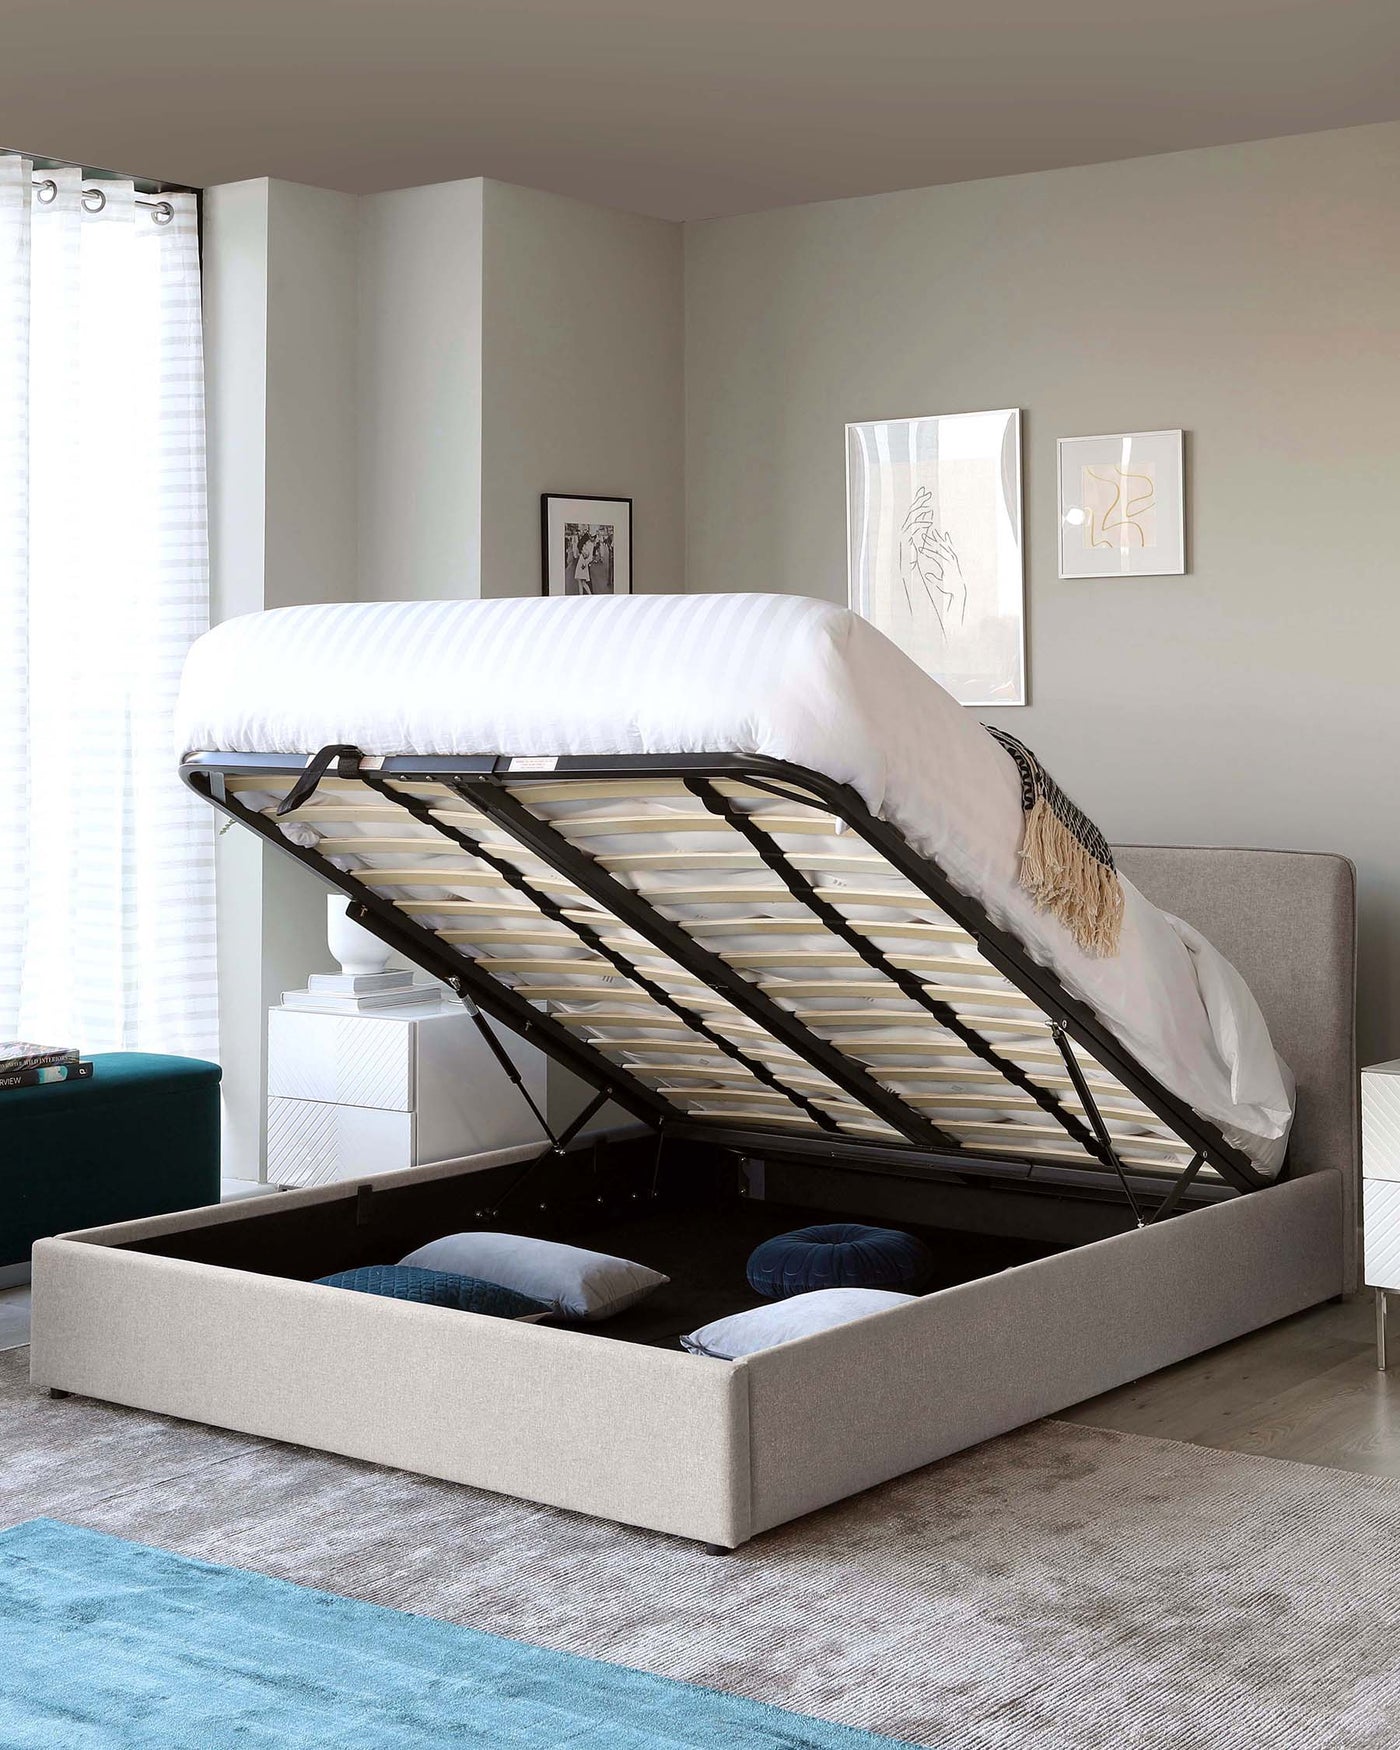 Modern upholstered bed frame with a lift-up storage system. The headboard is gently angled and covered in a light grey fabric, matching the base. The bed is lifted, revealing a spacious storage compartment beneath the slatted mattress support, ideal for bedding and pillows.